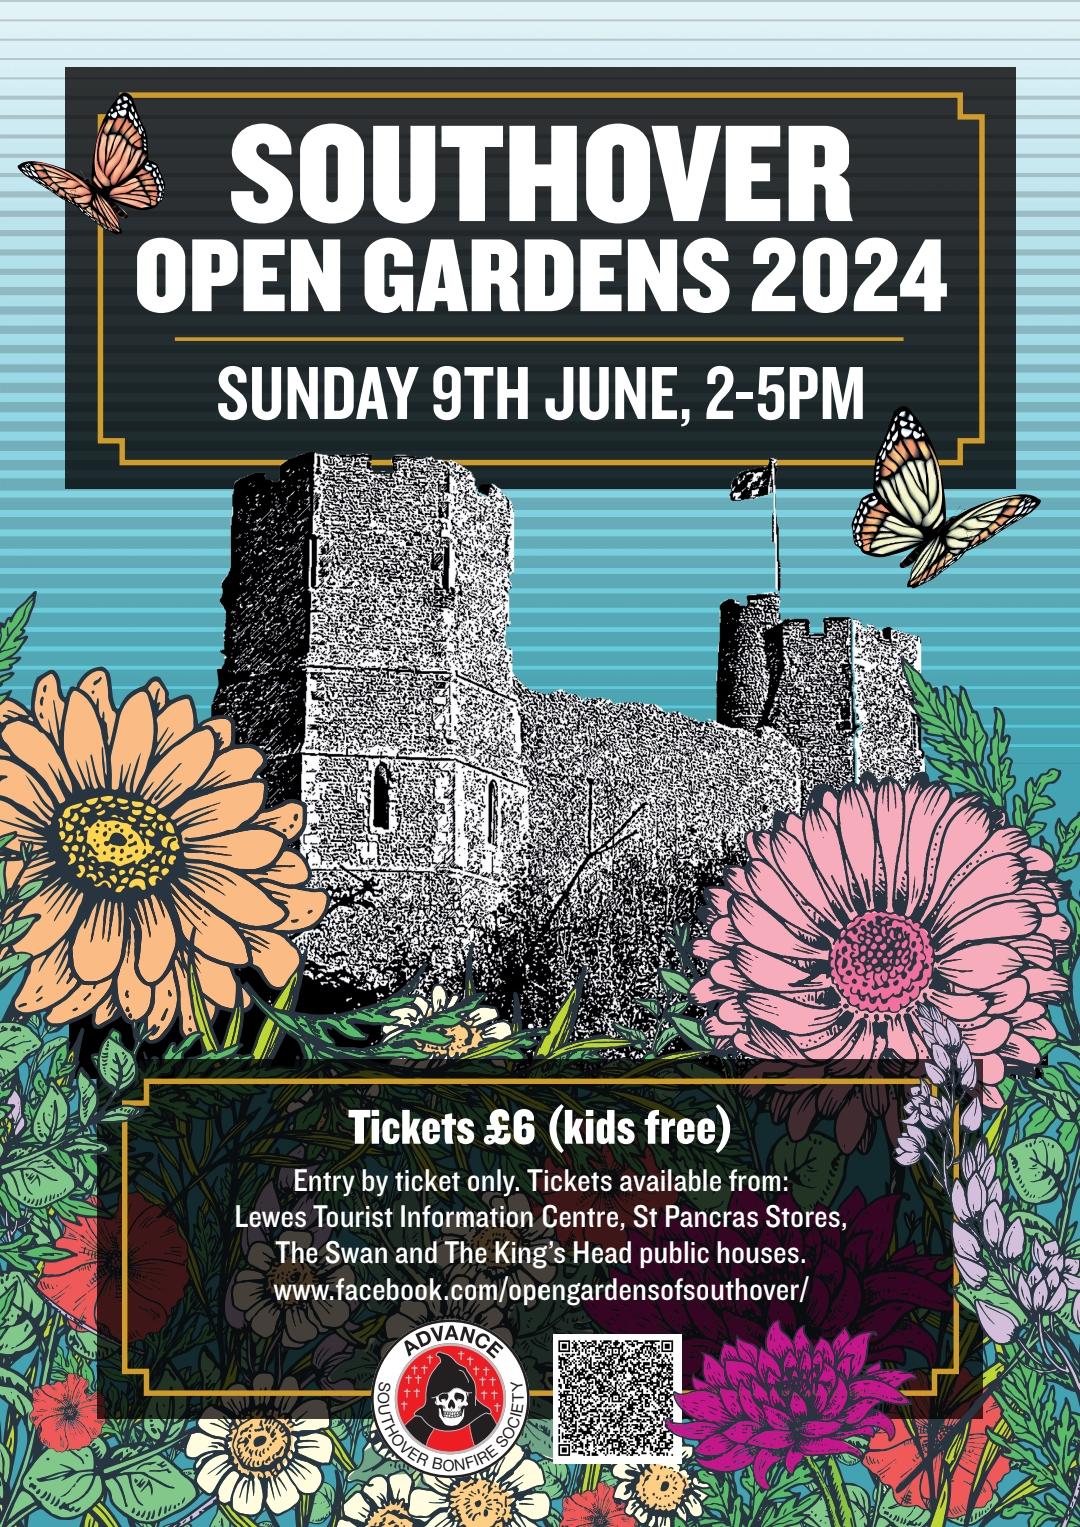 Southover Open Gardens 2024 poster. Text in paragraph above